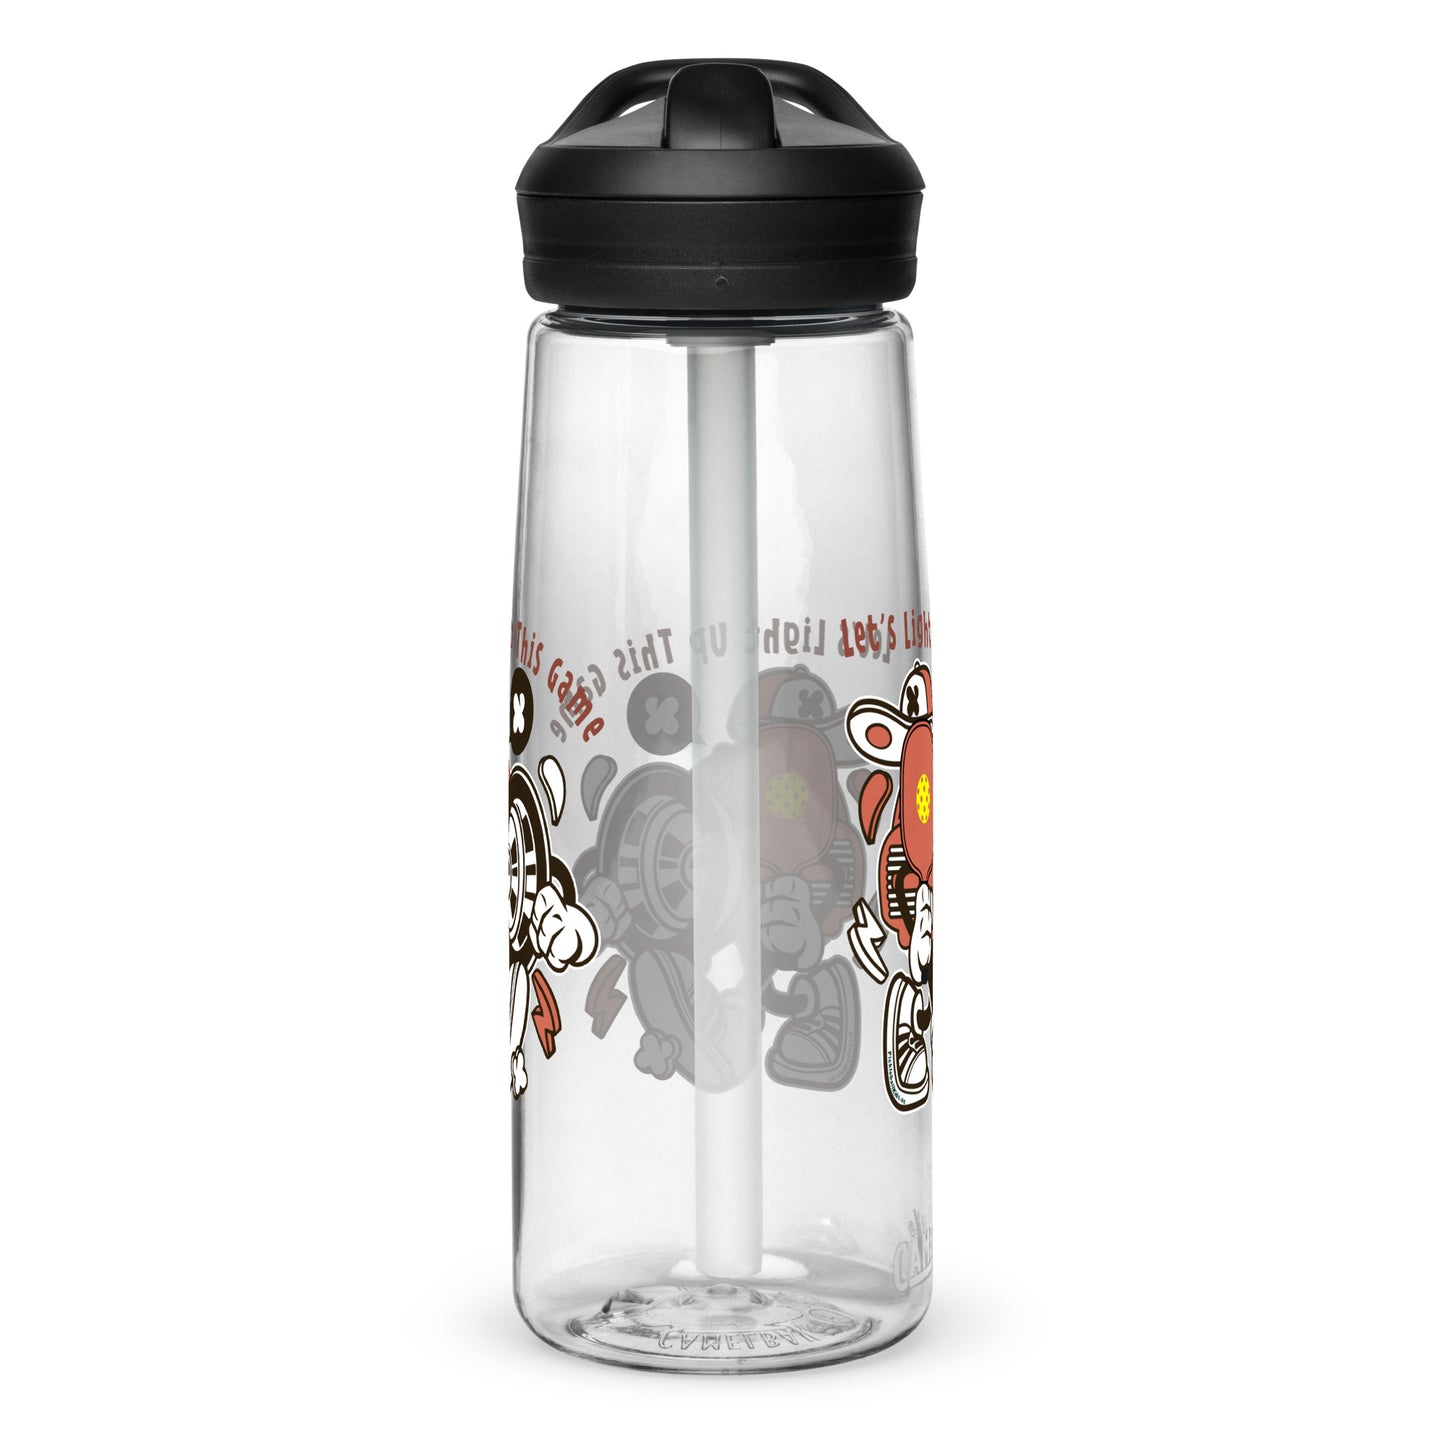 Fun Pickleball Gift Sports Water Bottle, "Let's Light Up This Game"